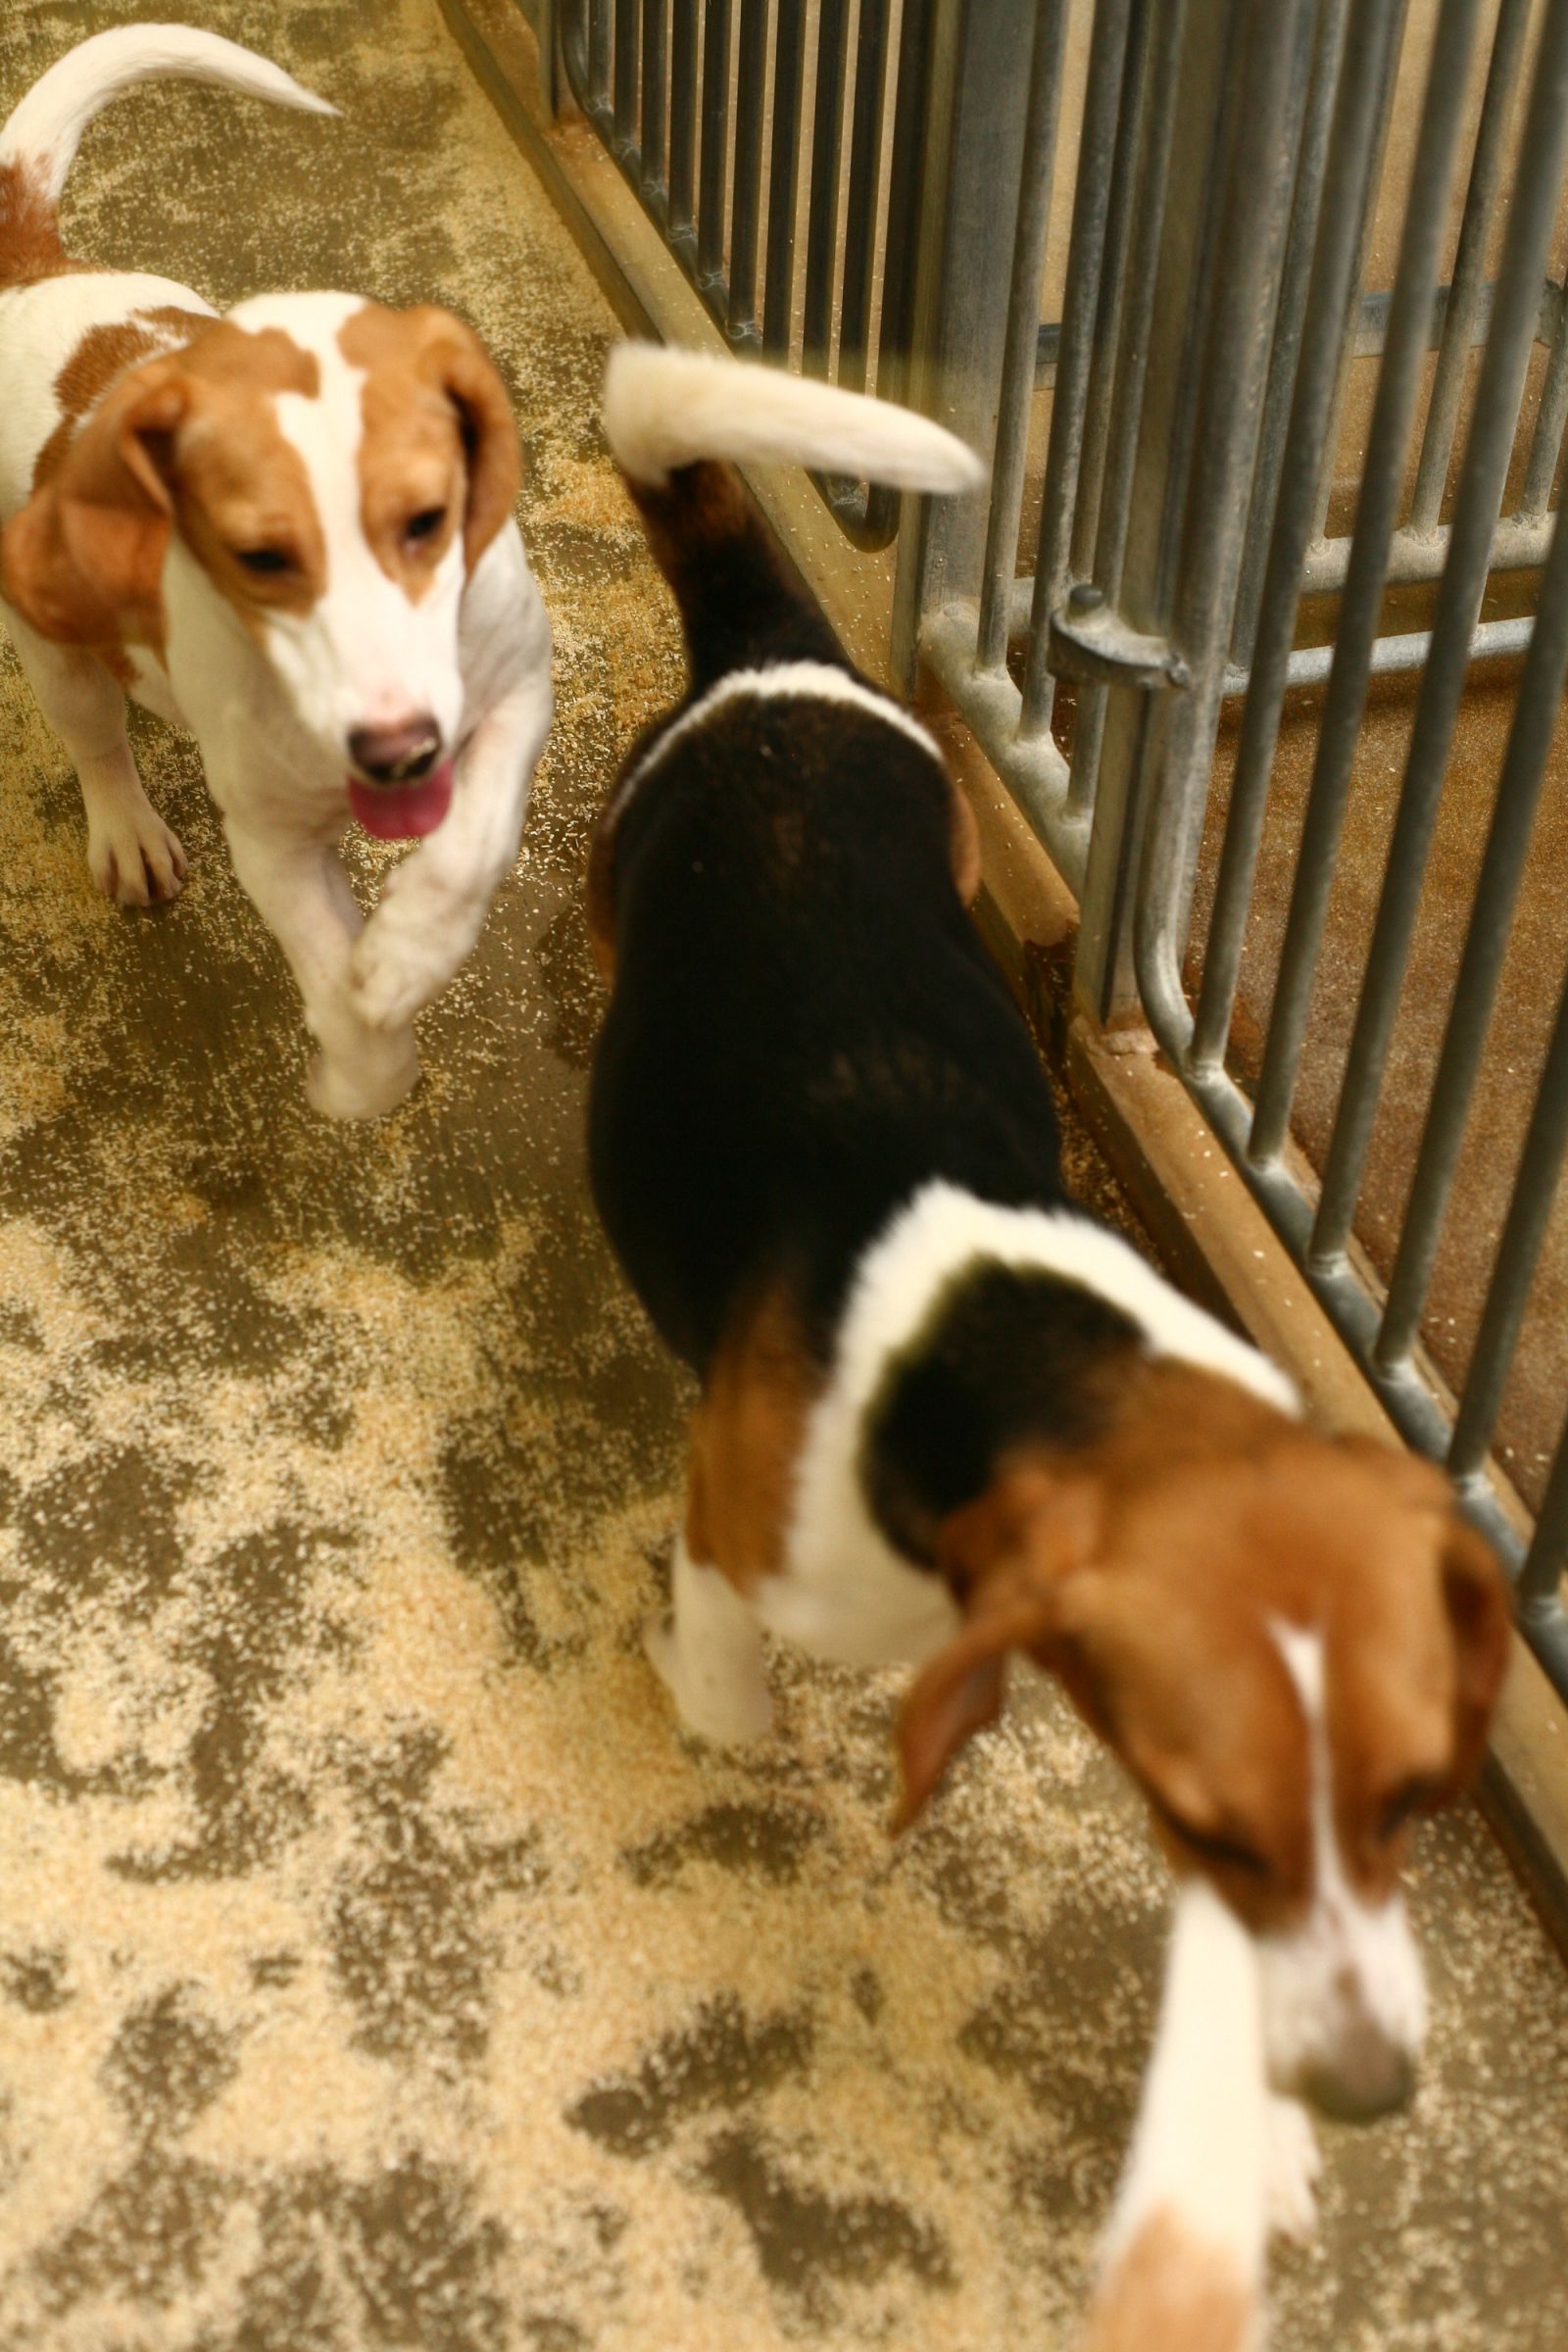 Two beagles running